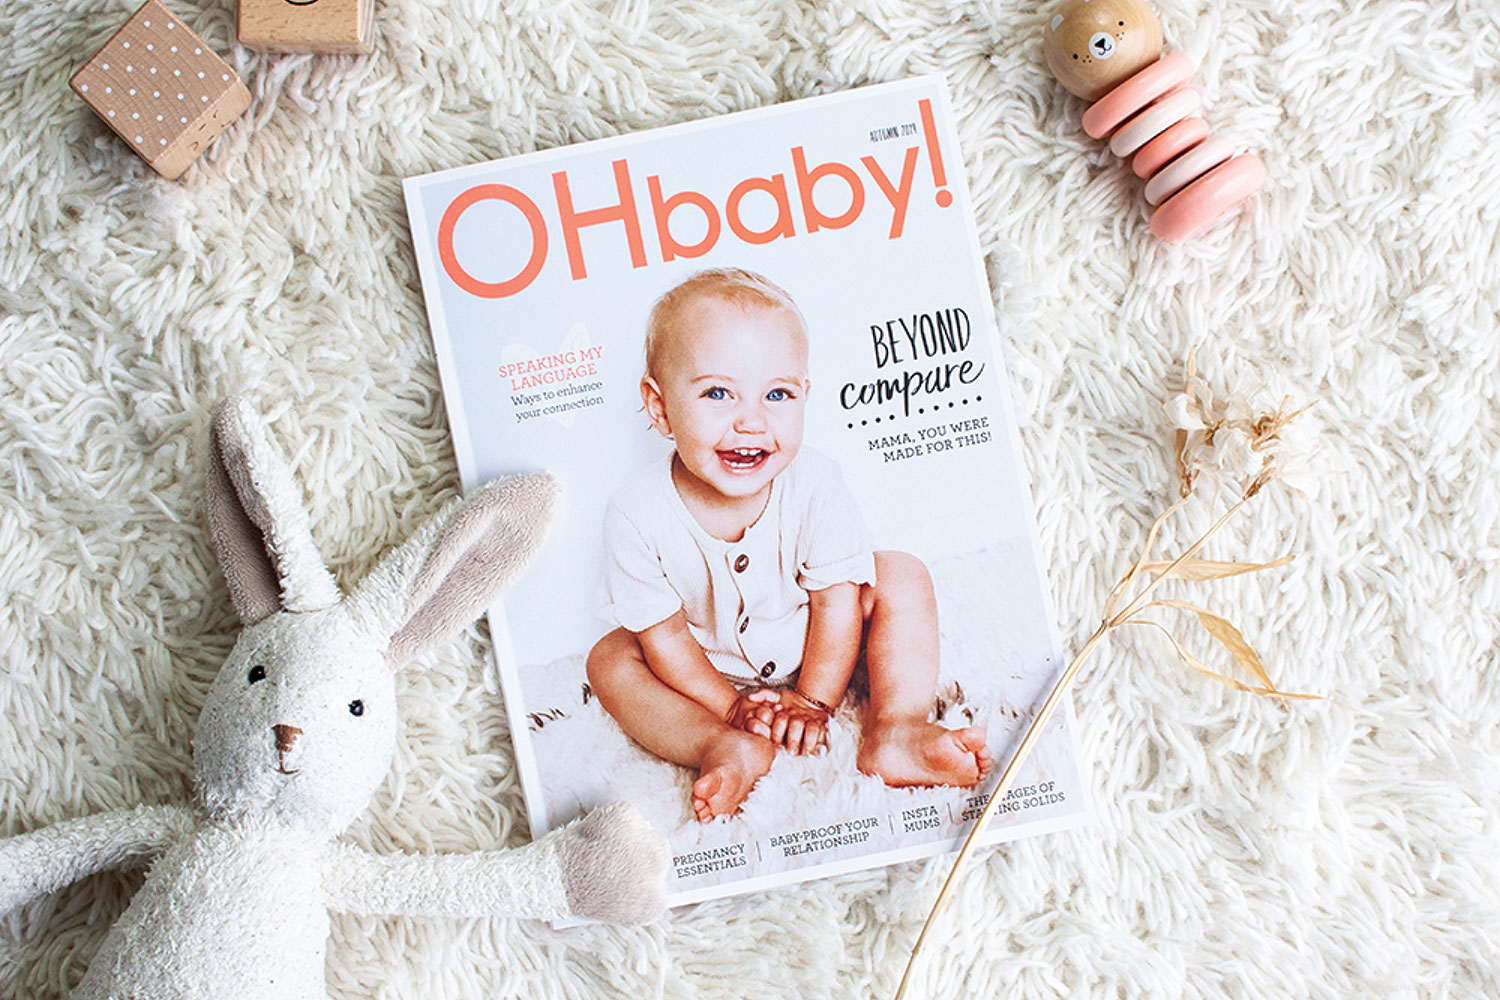 Advertising with OHbaby!